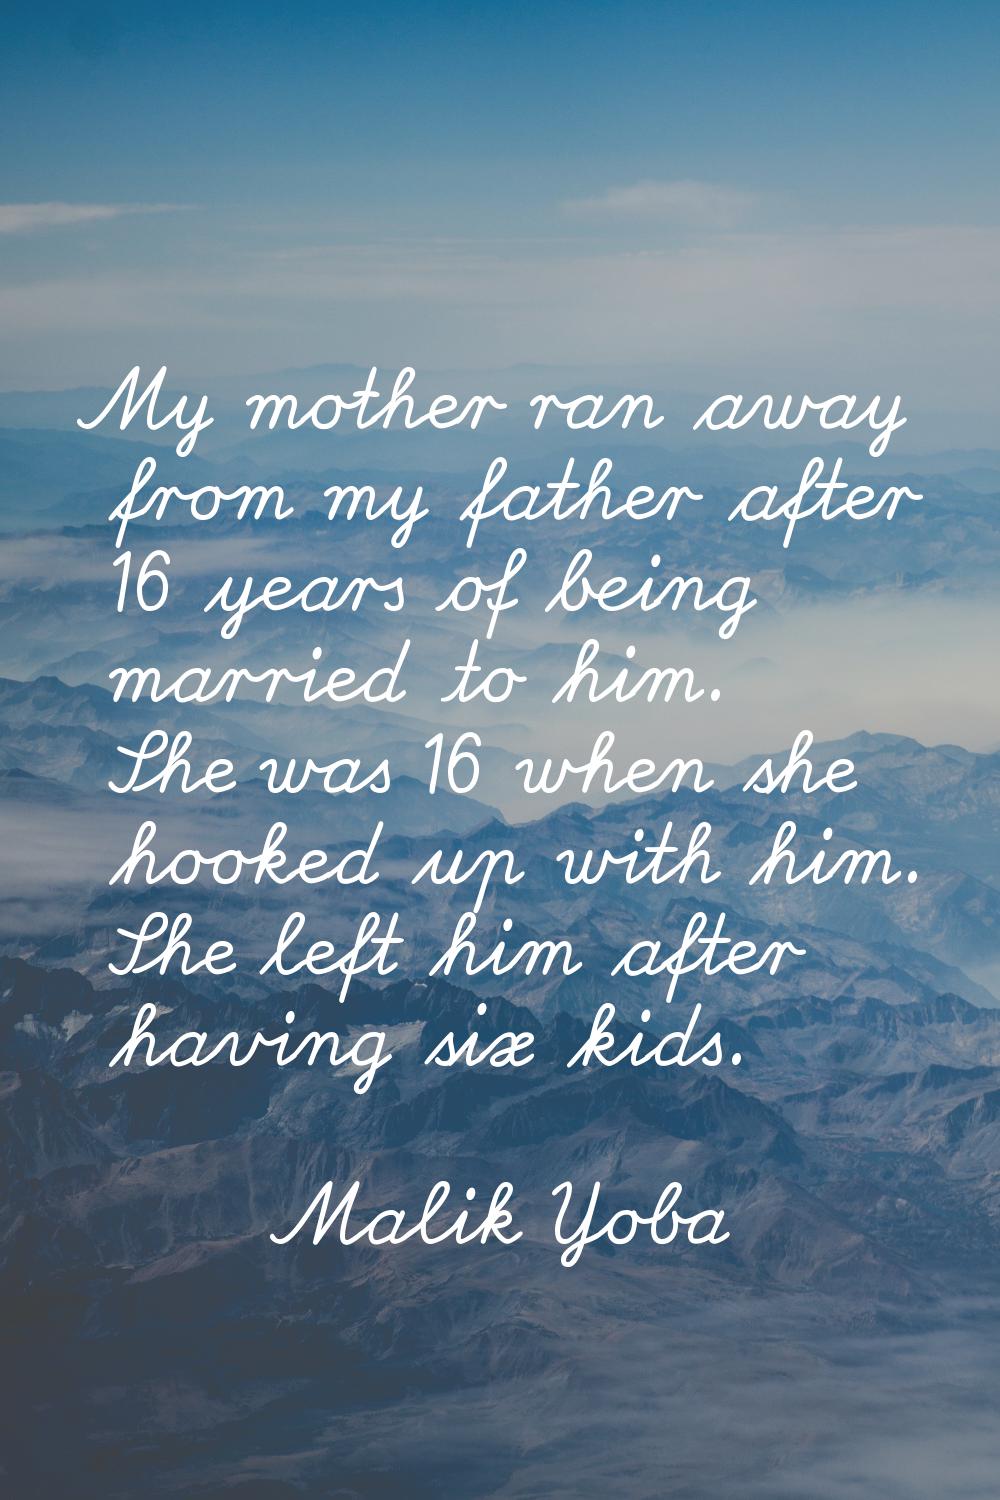 My mother ran away from my father after 16 years of being married to him. She was 16 when she hooke